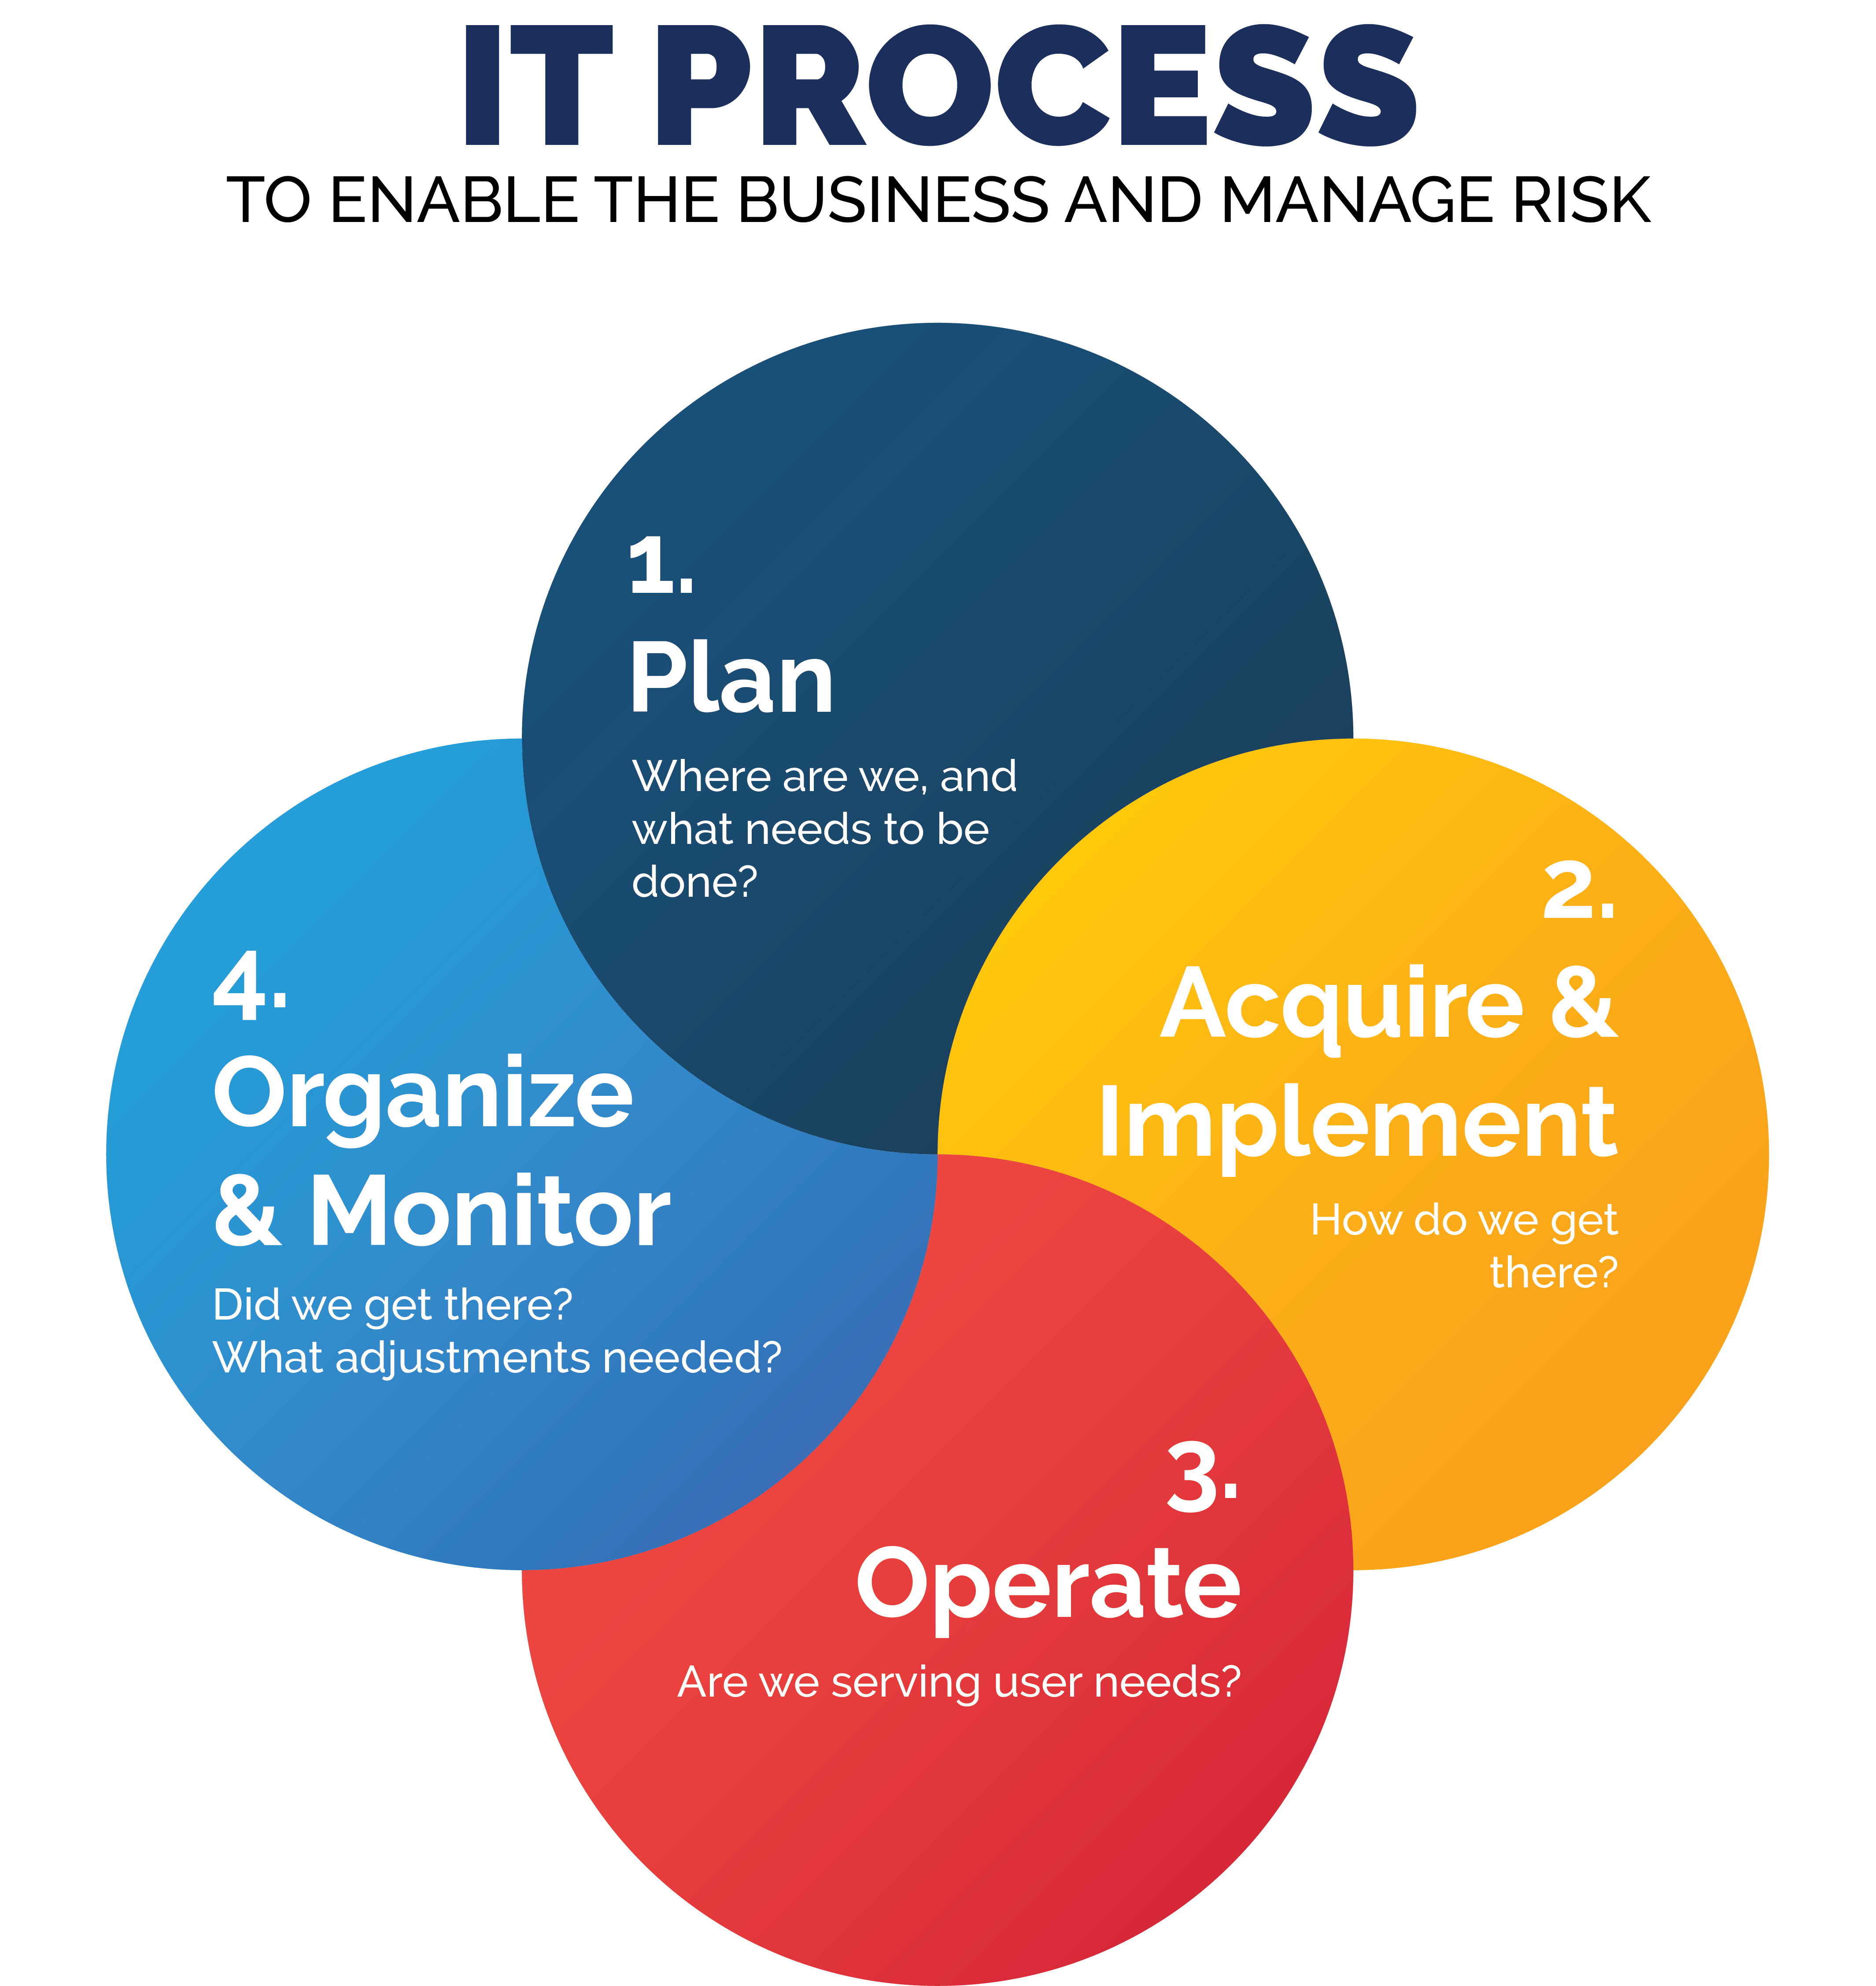 The IT Process chart.
To enable the business and manage risk. 
1. Plan - where are we, and what needs to be done?
2. Acquire & Implement - How do we get there?
3. Operate - are we serving user needs?
4. Organize & monitor - did we get there? What adjustments are needed?